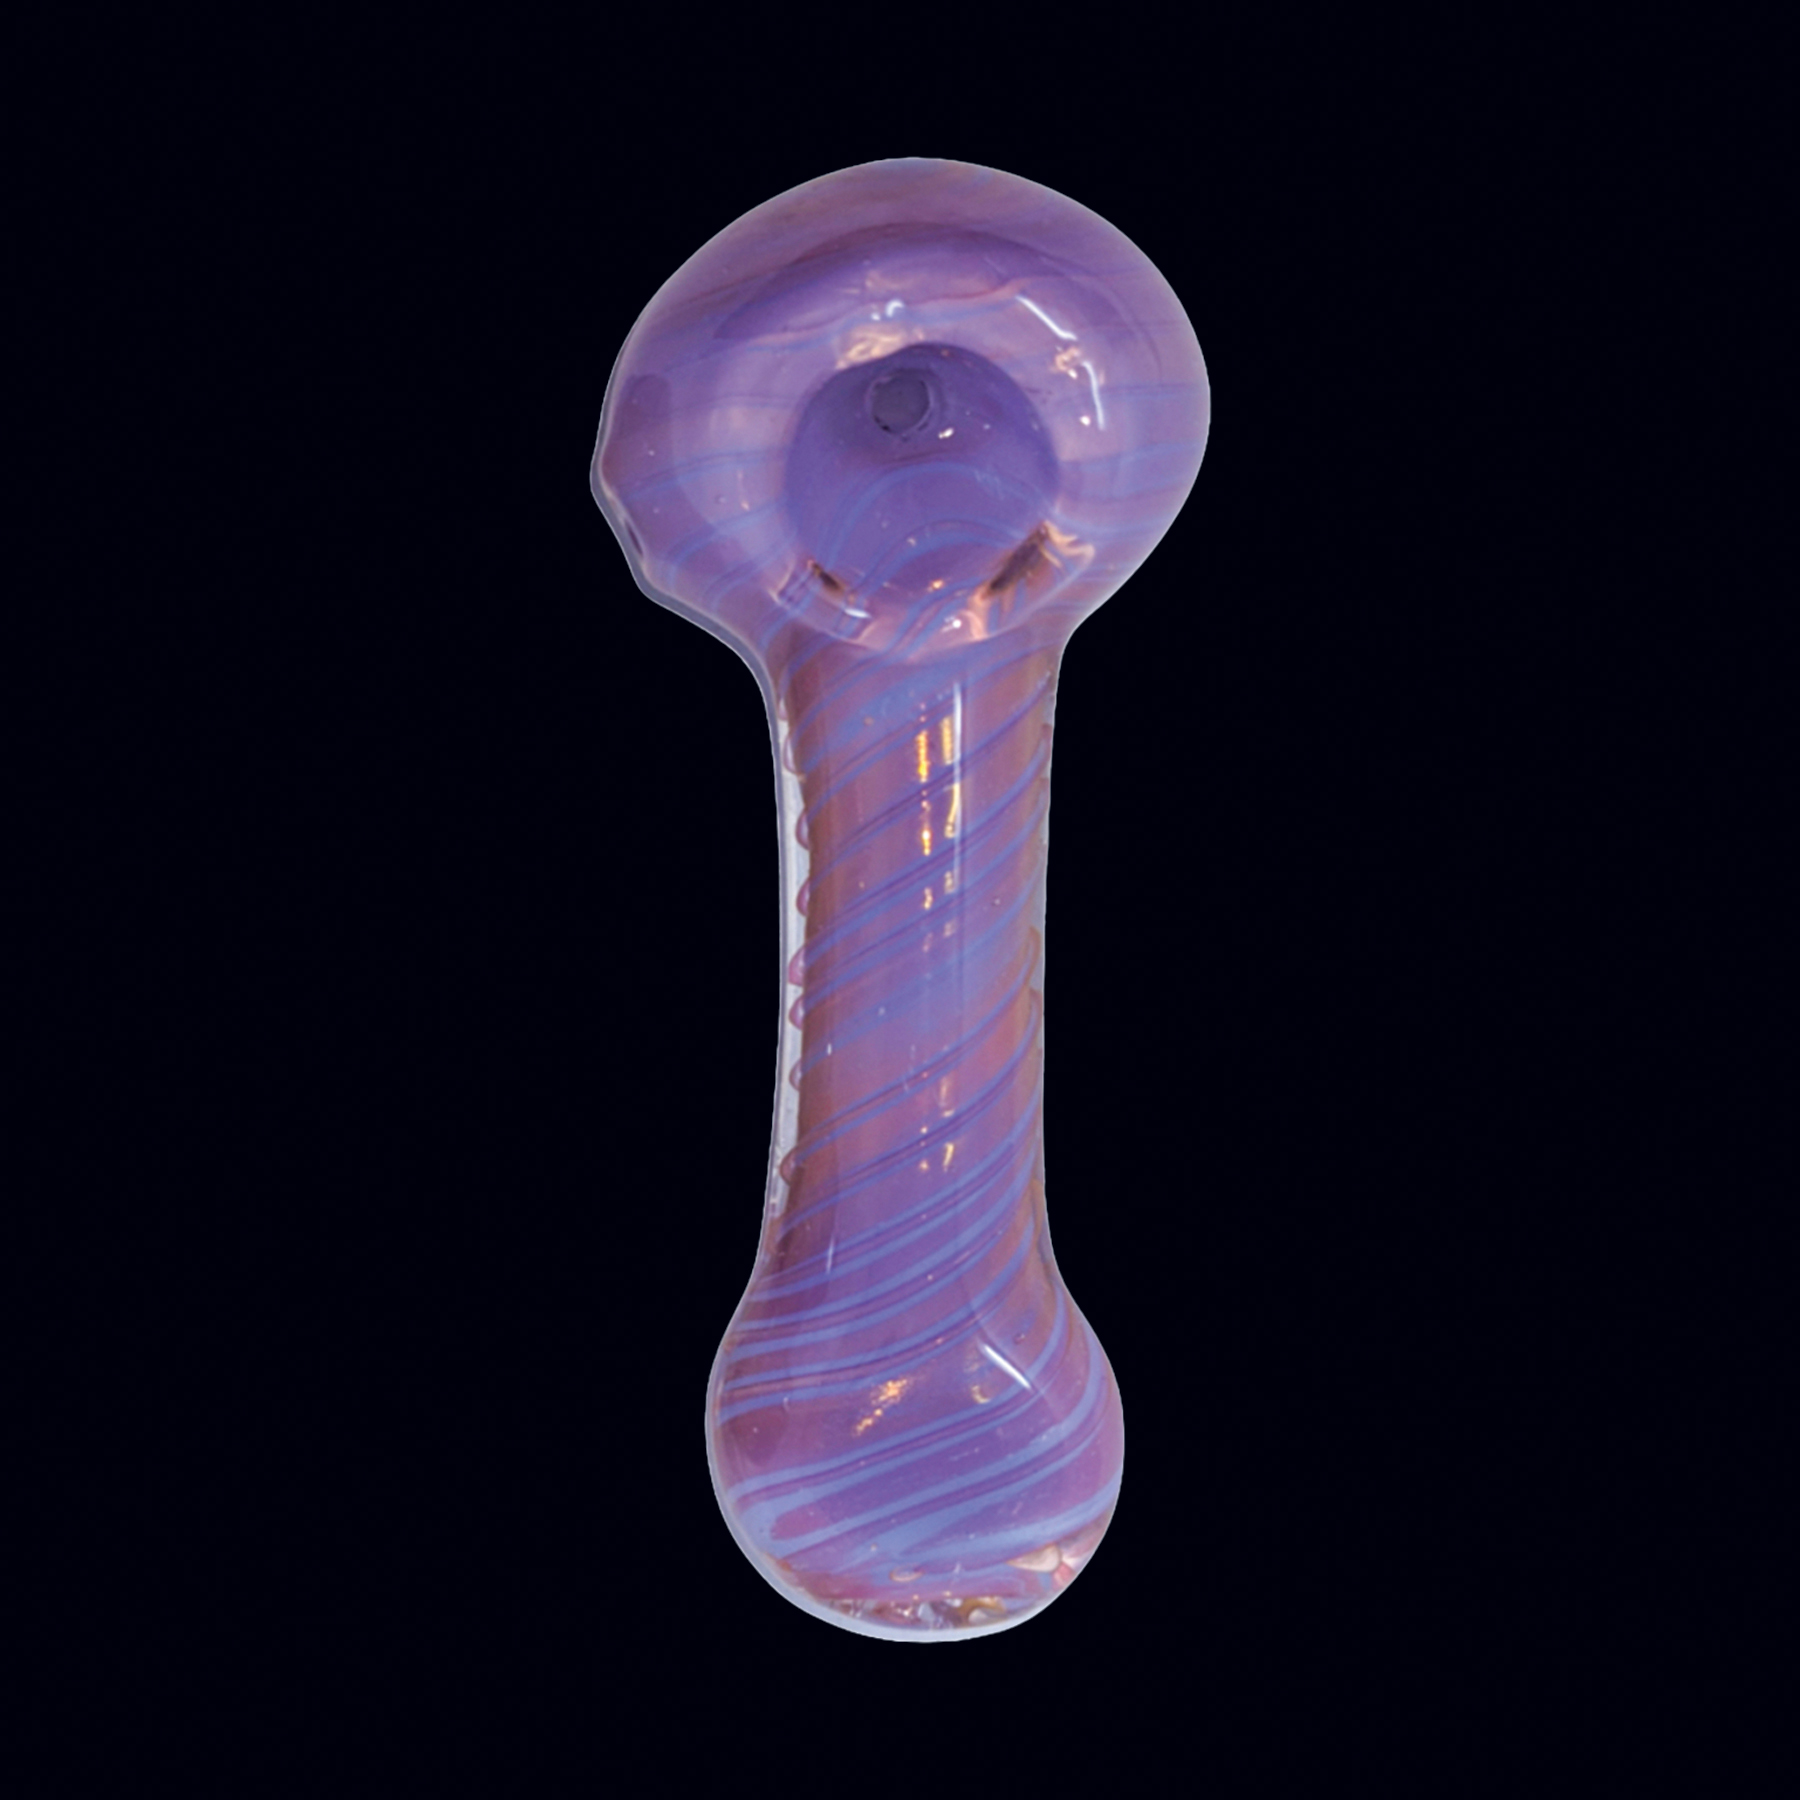 A purple glass dildo is shown on the black background.